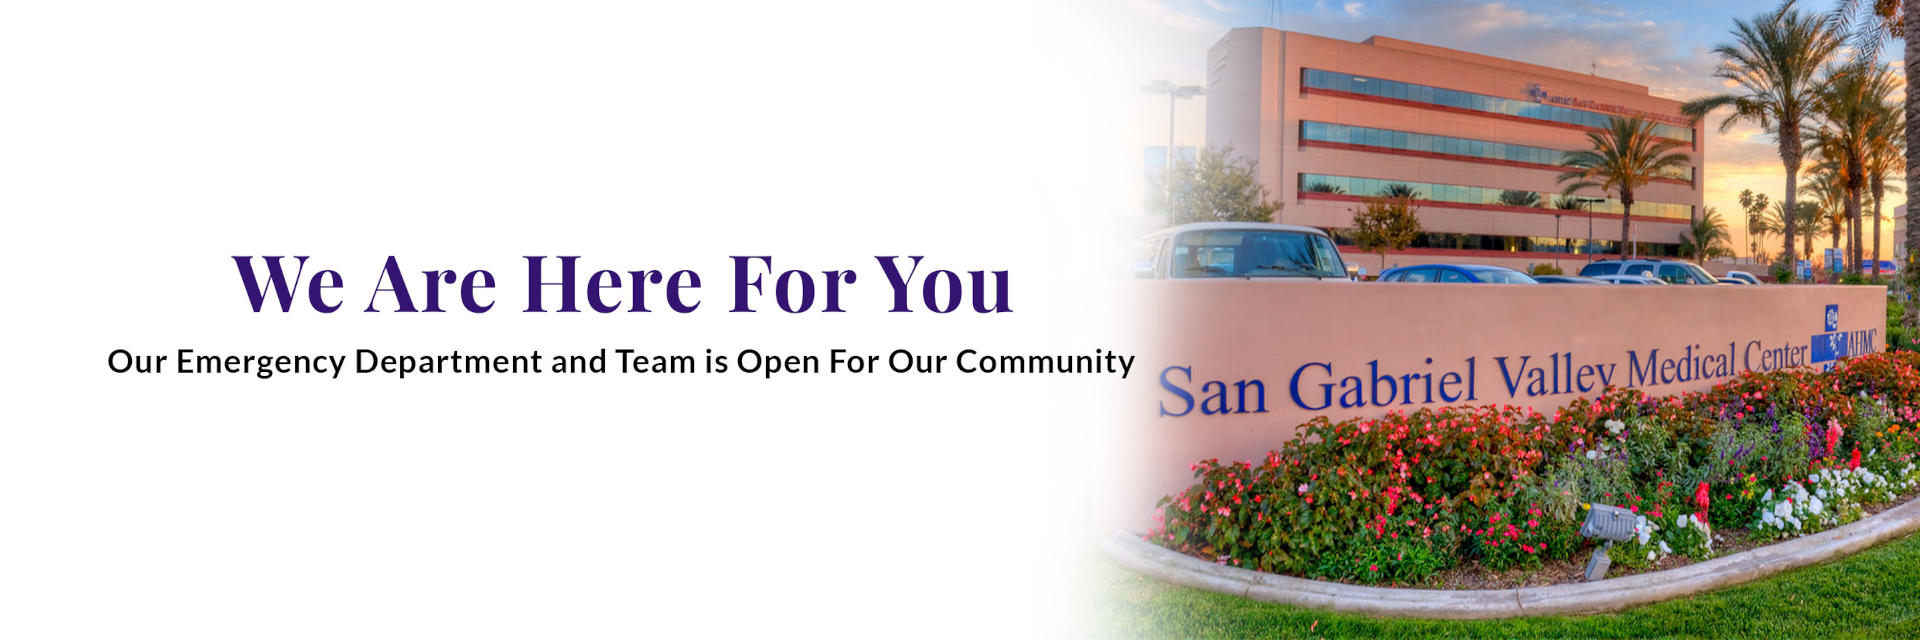 We Are Here For You
Our Emergency Department and Team is Open For Our Community

San Gabriel Valley Medical Center AHMC